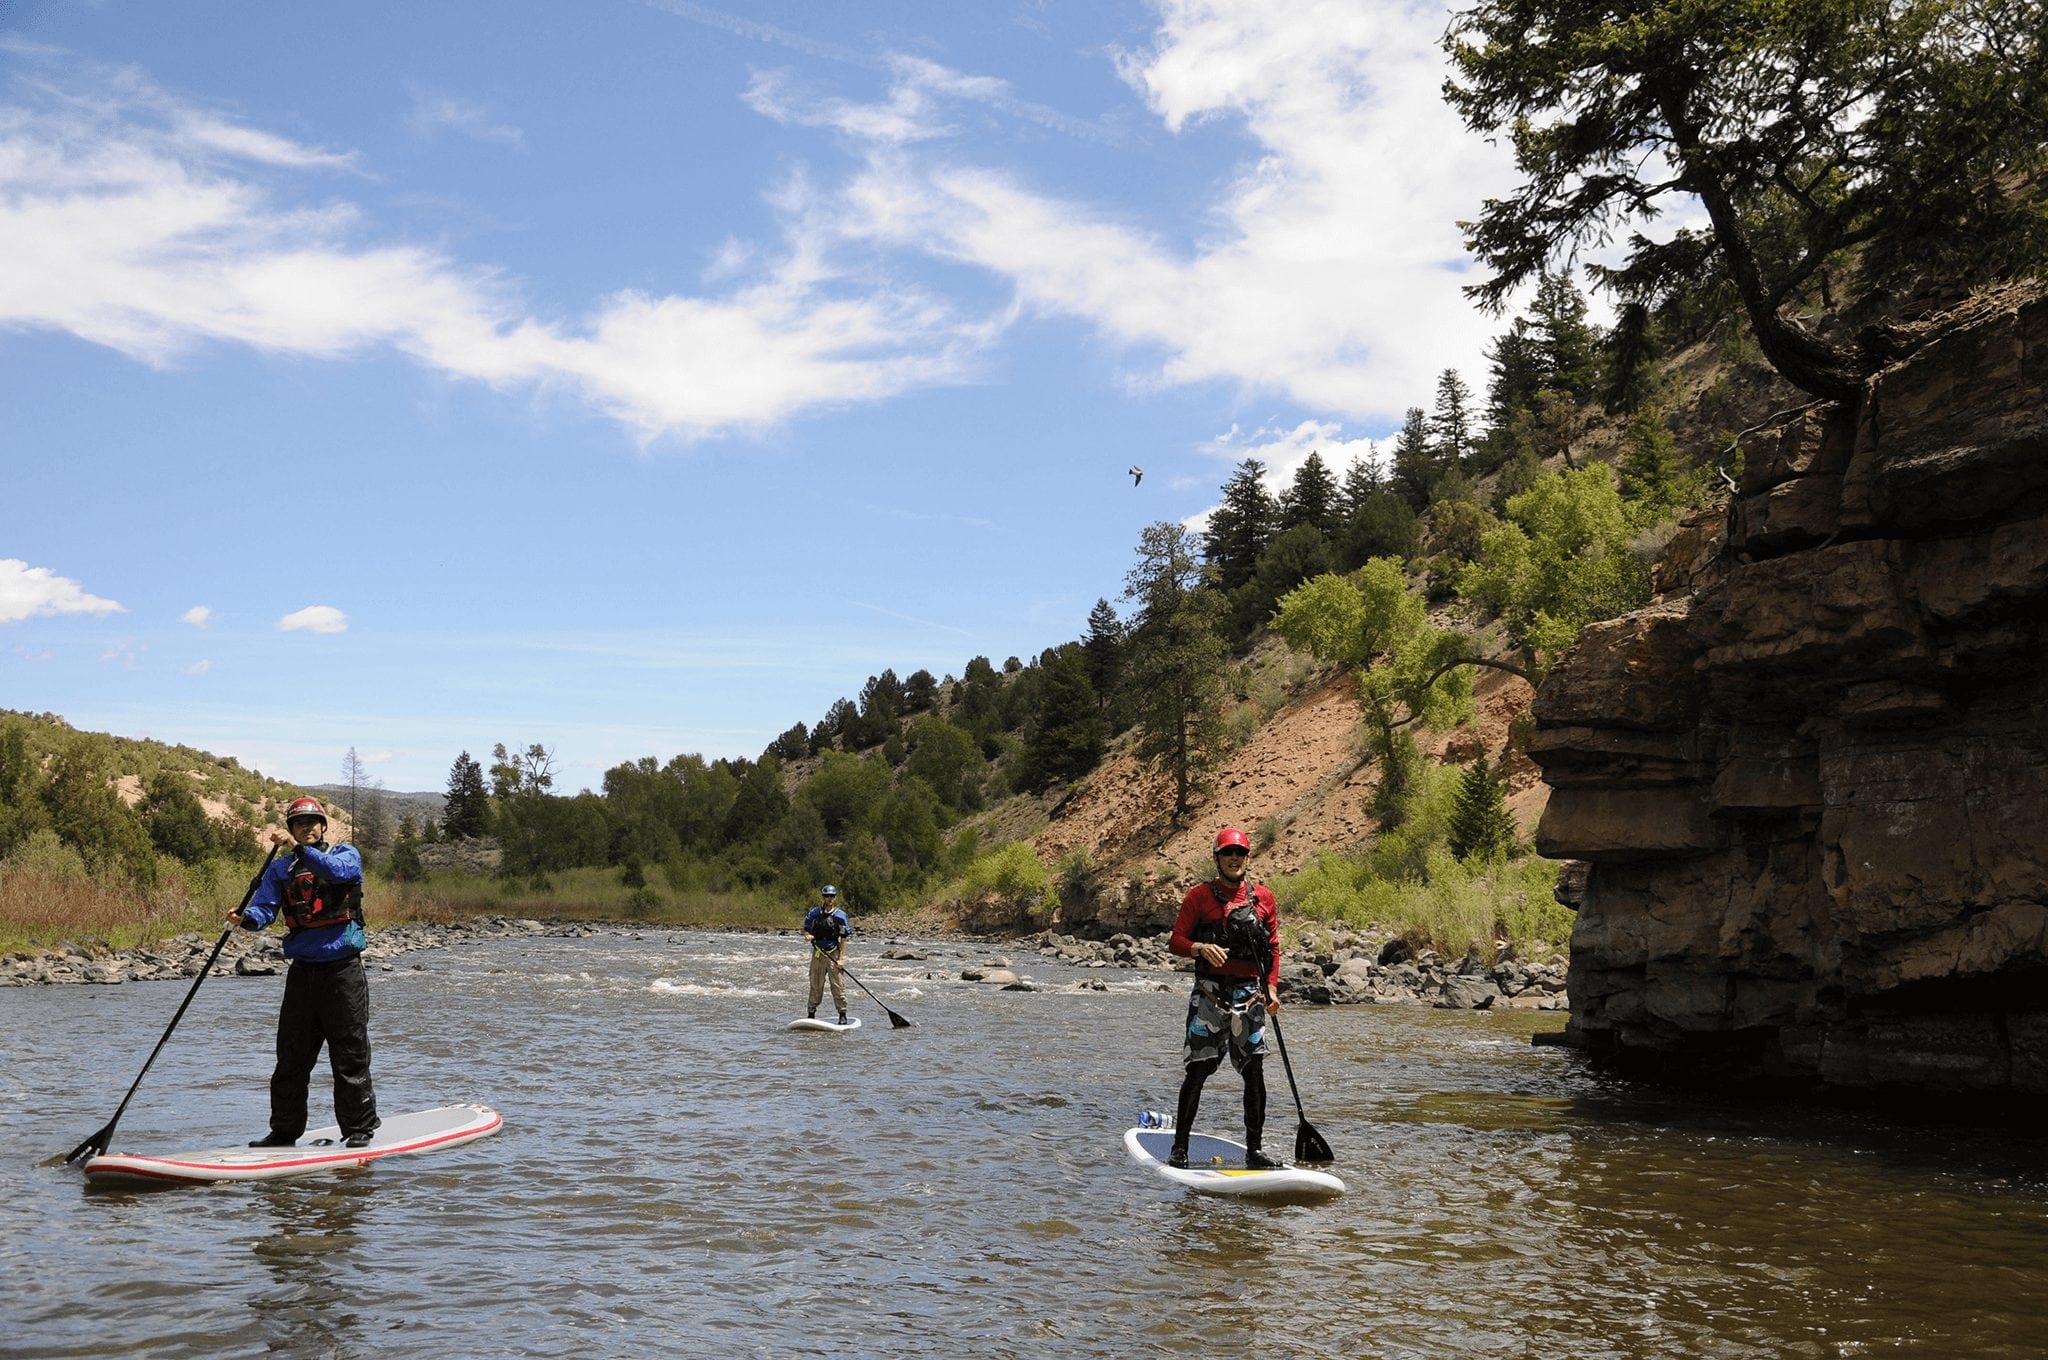 Group of people Paddleboarding on the river in Breckenridge.